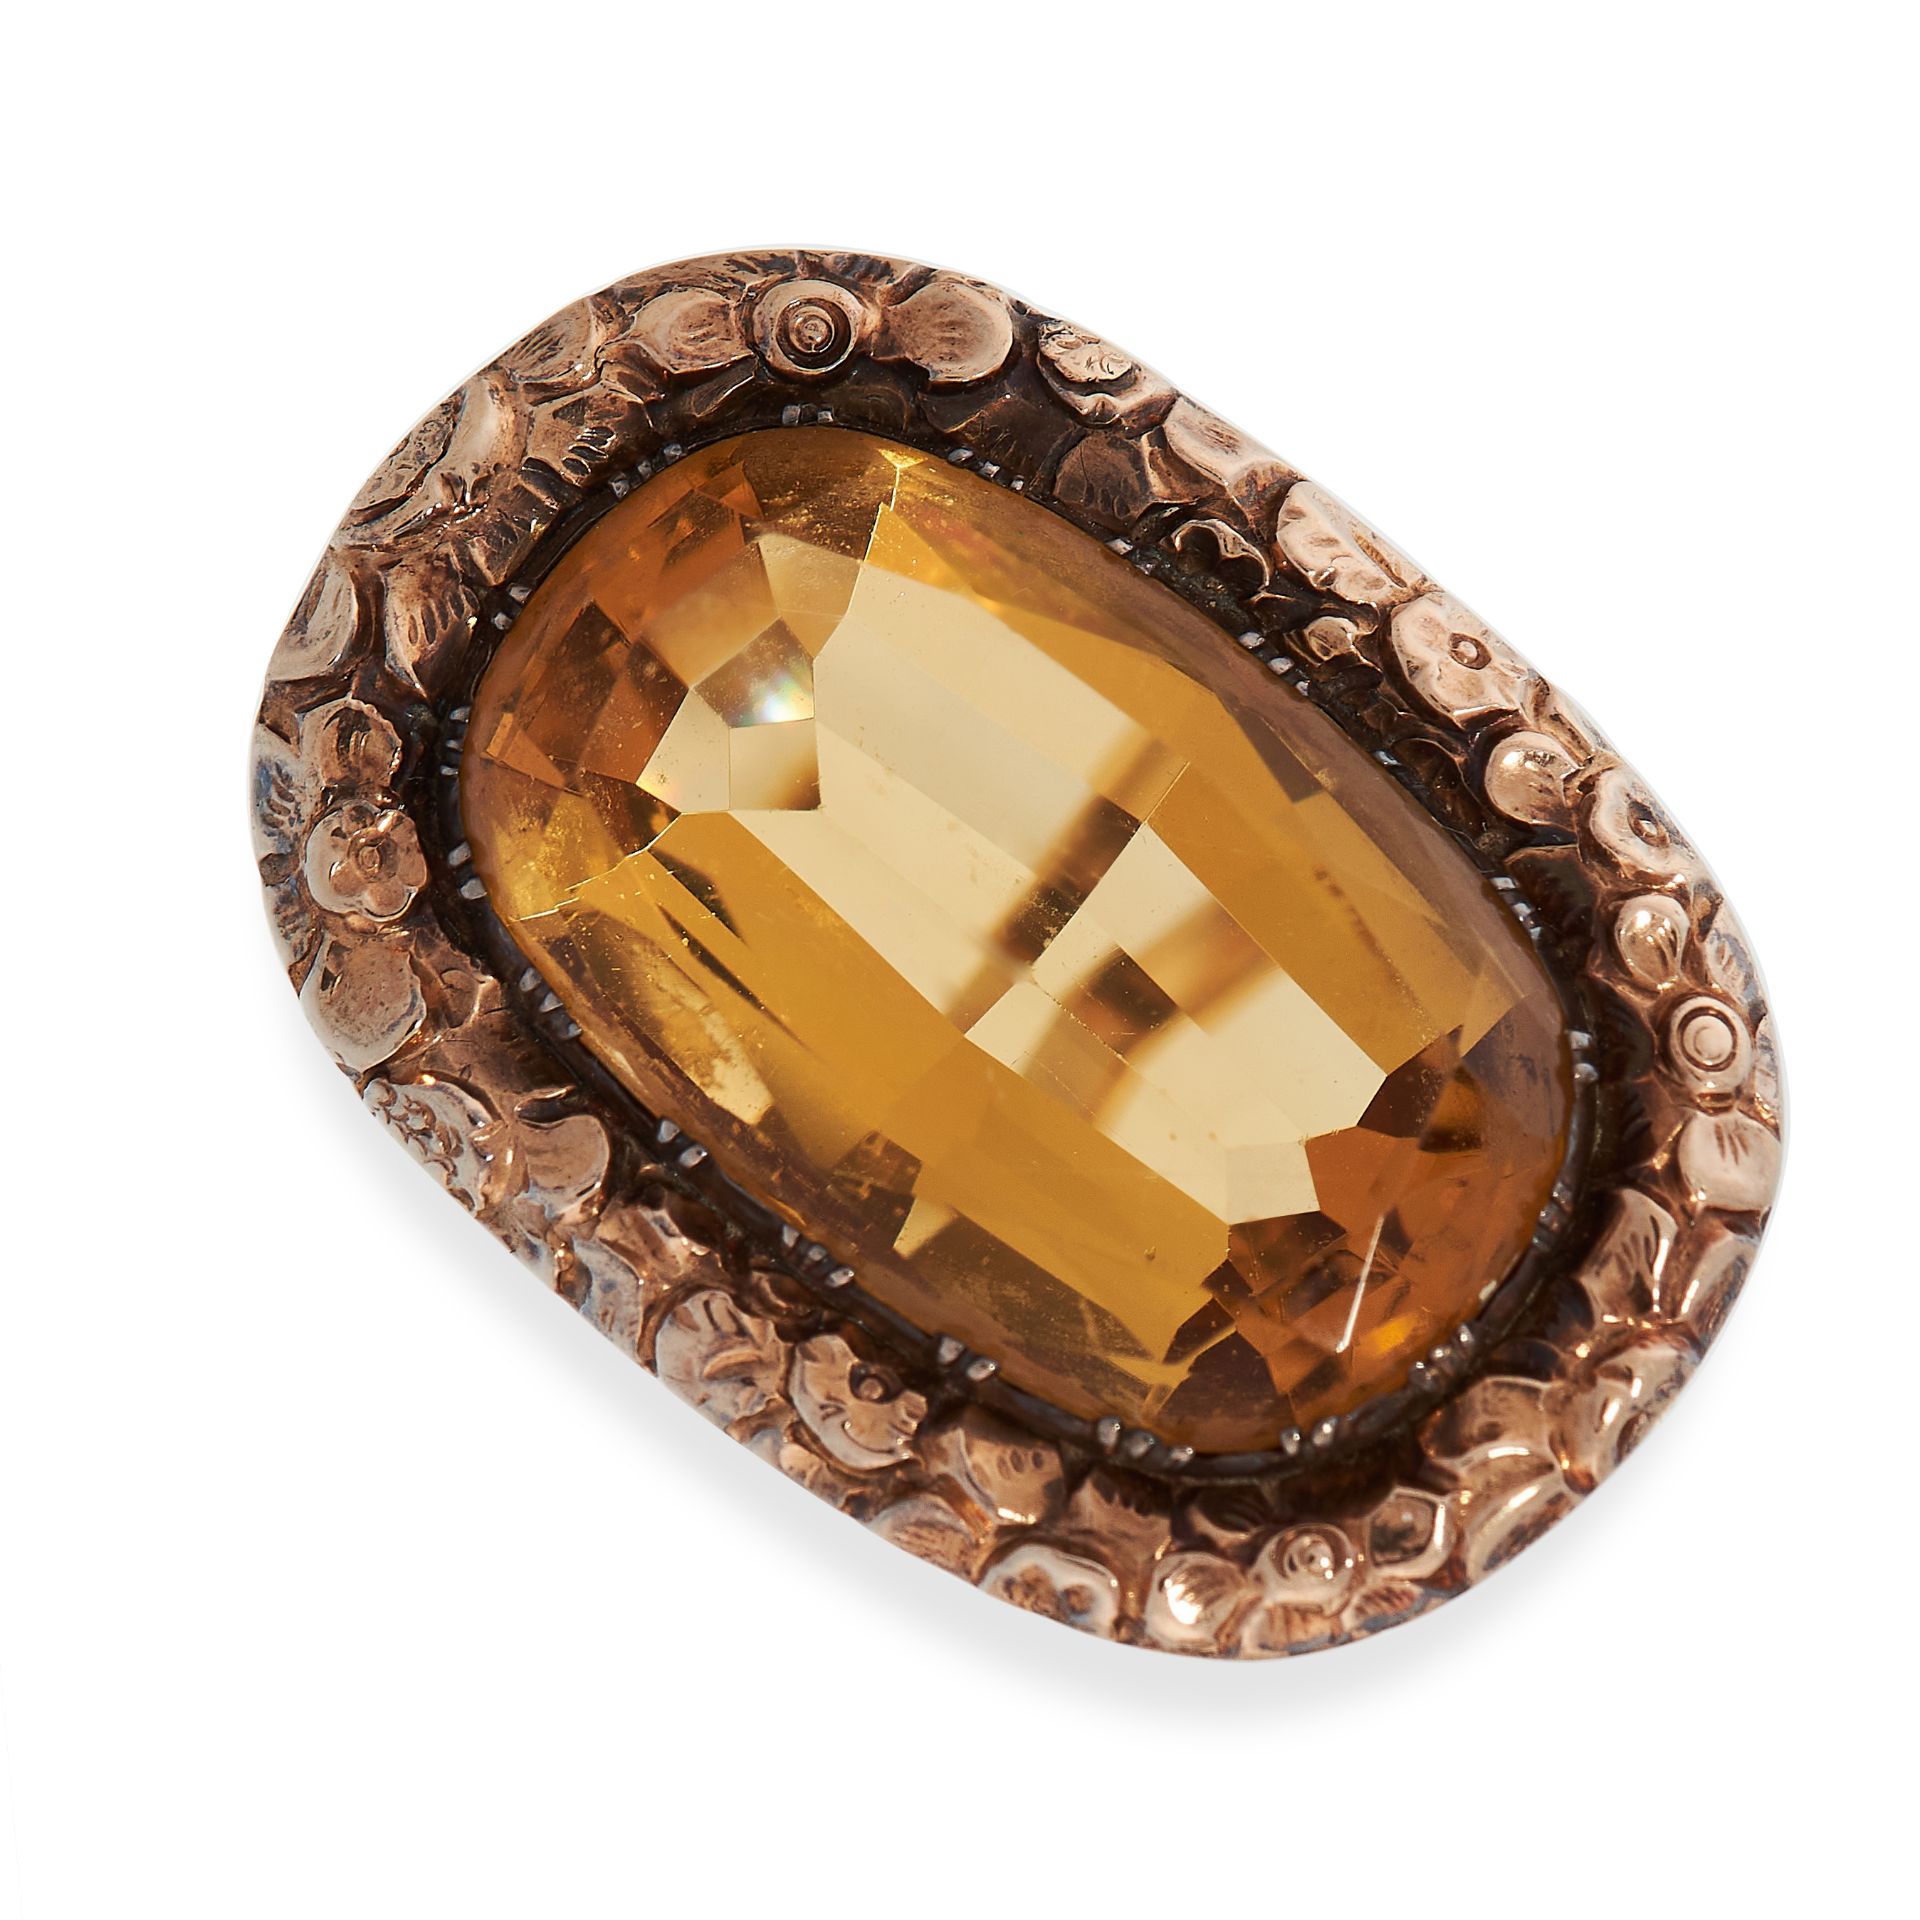 ANTIQUE CITRINE RING in yellow gold, set with a cushion cut citrine of 20.60 carats, in a foliate